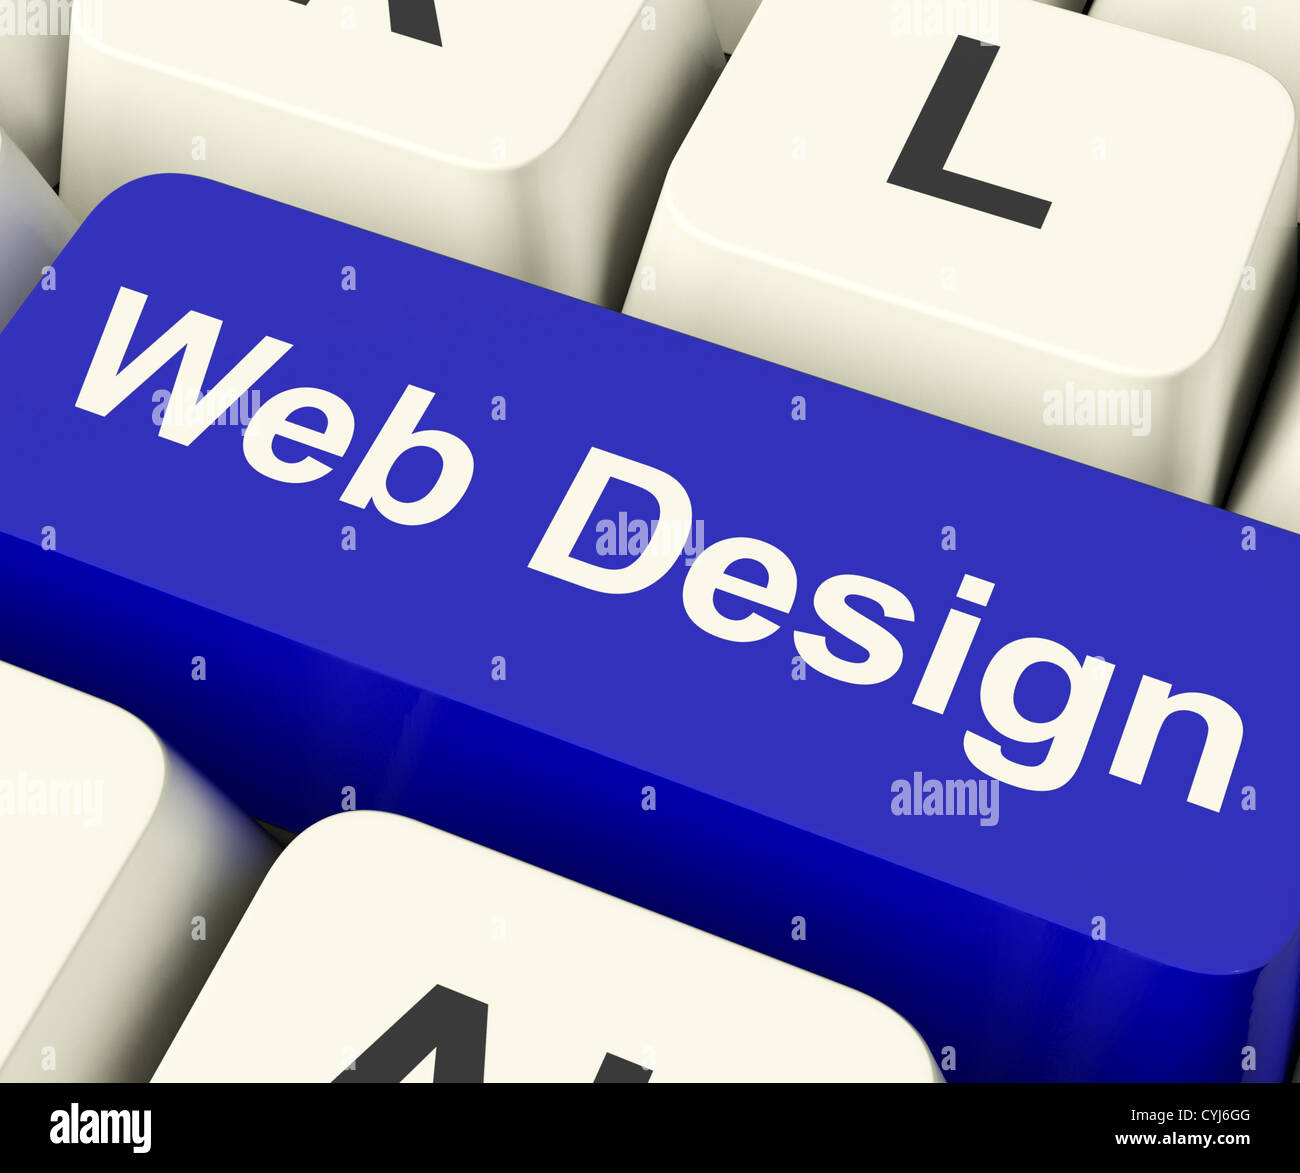 Web Design Computer Key Shows Internet Or Online Graphic Designing Stock Photo